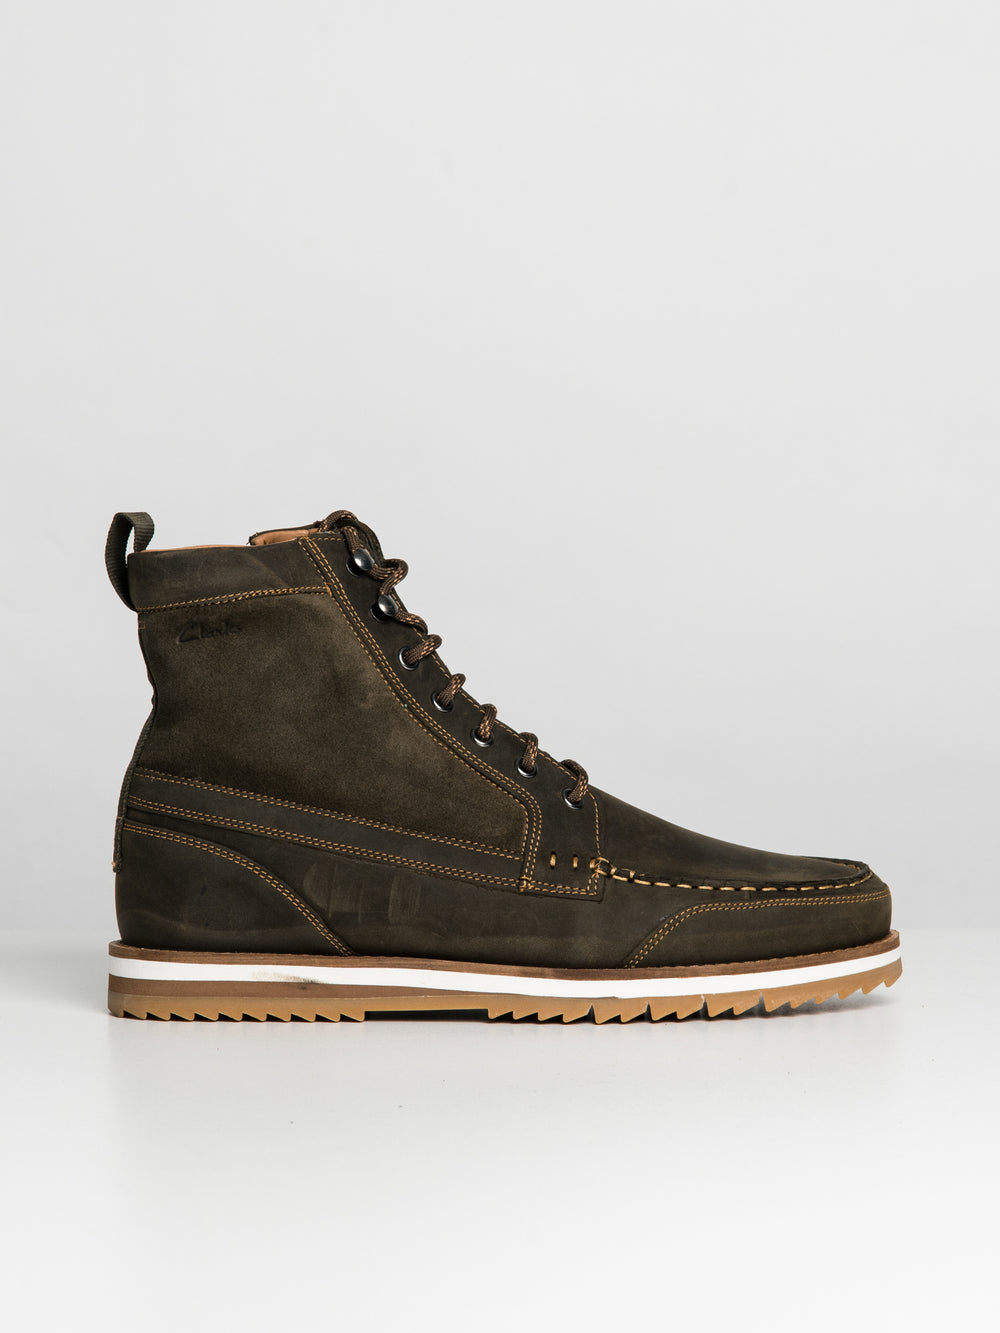 MENS CLARKS DURSTON HI BOOT - CLEARANCE